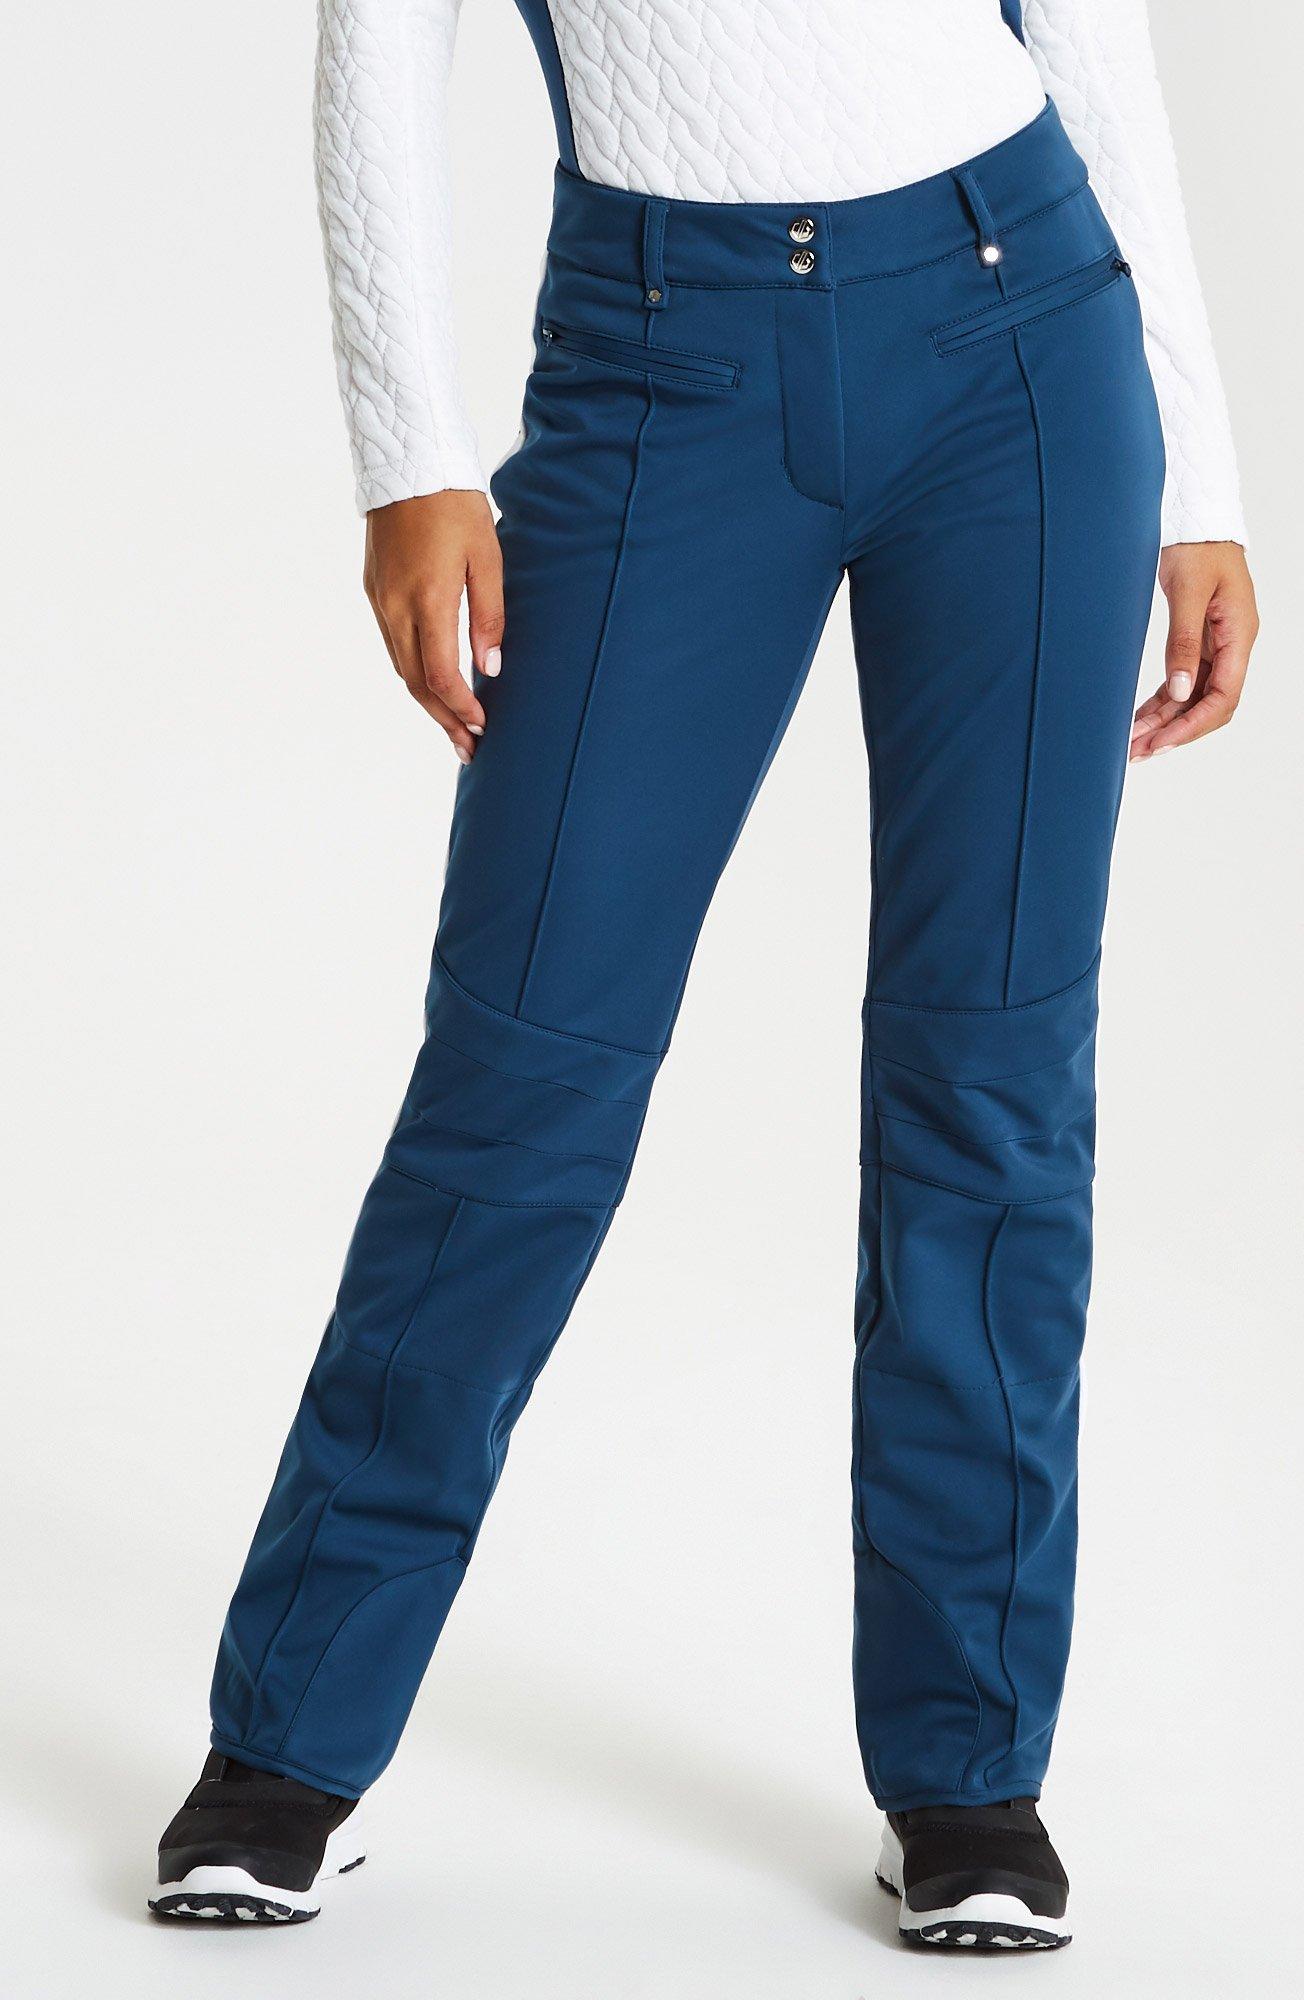 Dare 2B Women's Clarity Luxe Ski Pants Review